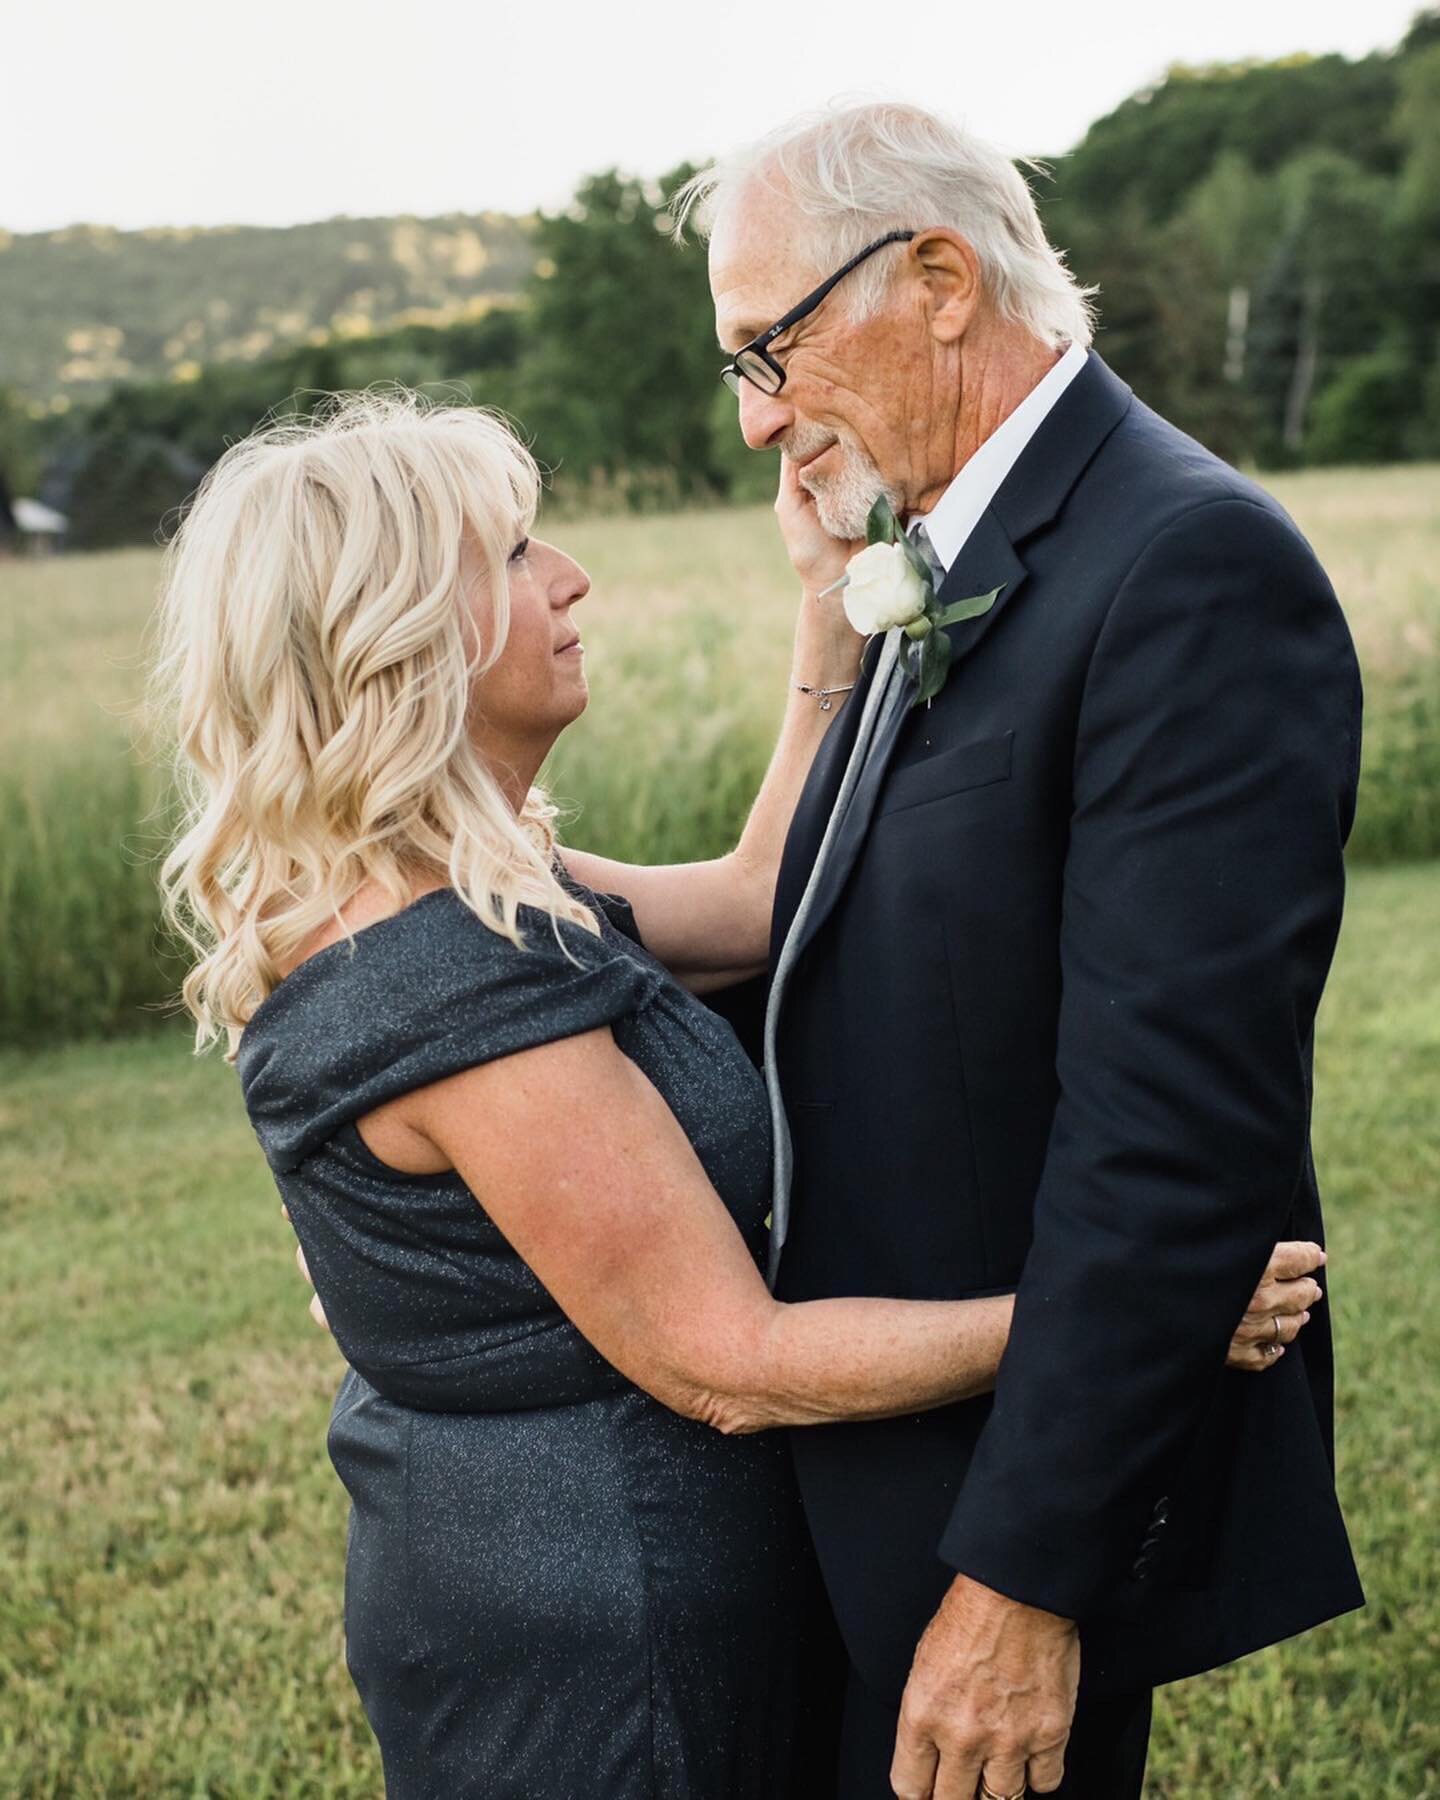 This couple rented a home in the hills of Elicottville for their wedding and it was perfect. Mary and Gene are amazing together and their family and friends had such a great time celebrating them ❤️